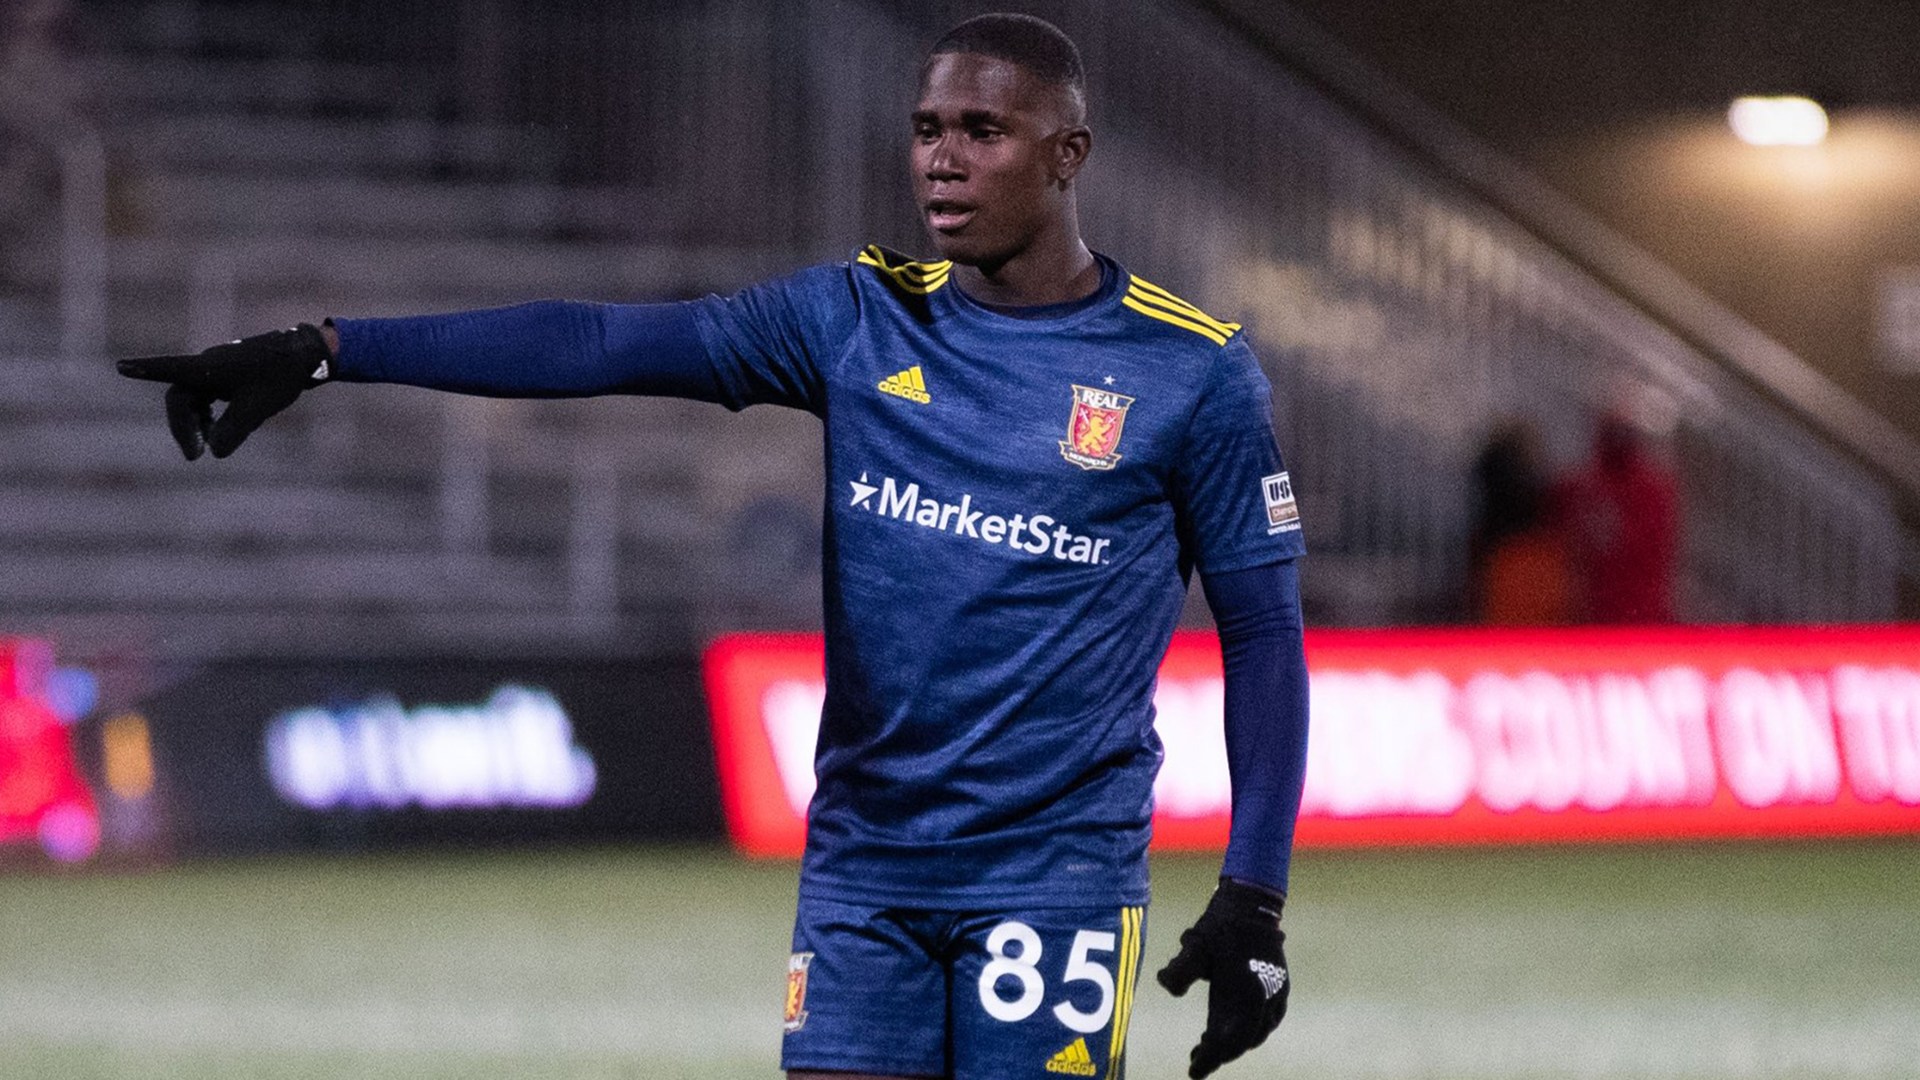 Real Salt Lake make homegrown forward Axel Kei youngest player in MLS history  | MLSSoccer.com